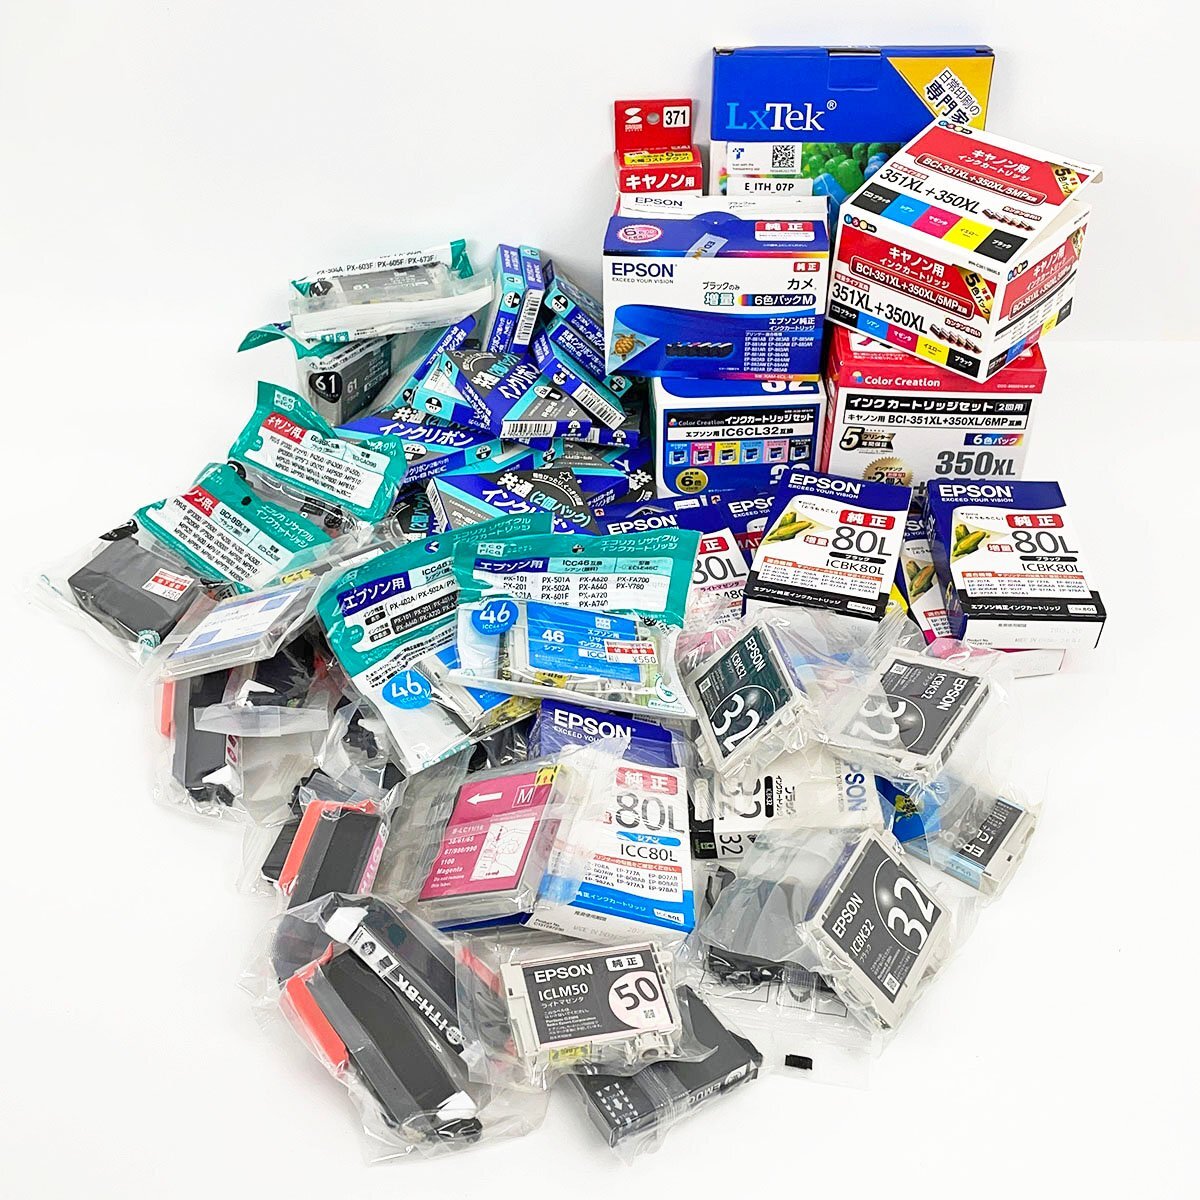  junk printer ink Epson Canon word-processor for ink ribbon set sale interchangeable goods large amount set [F6640]